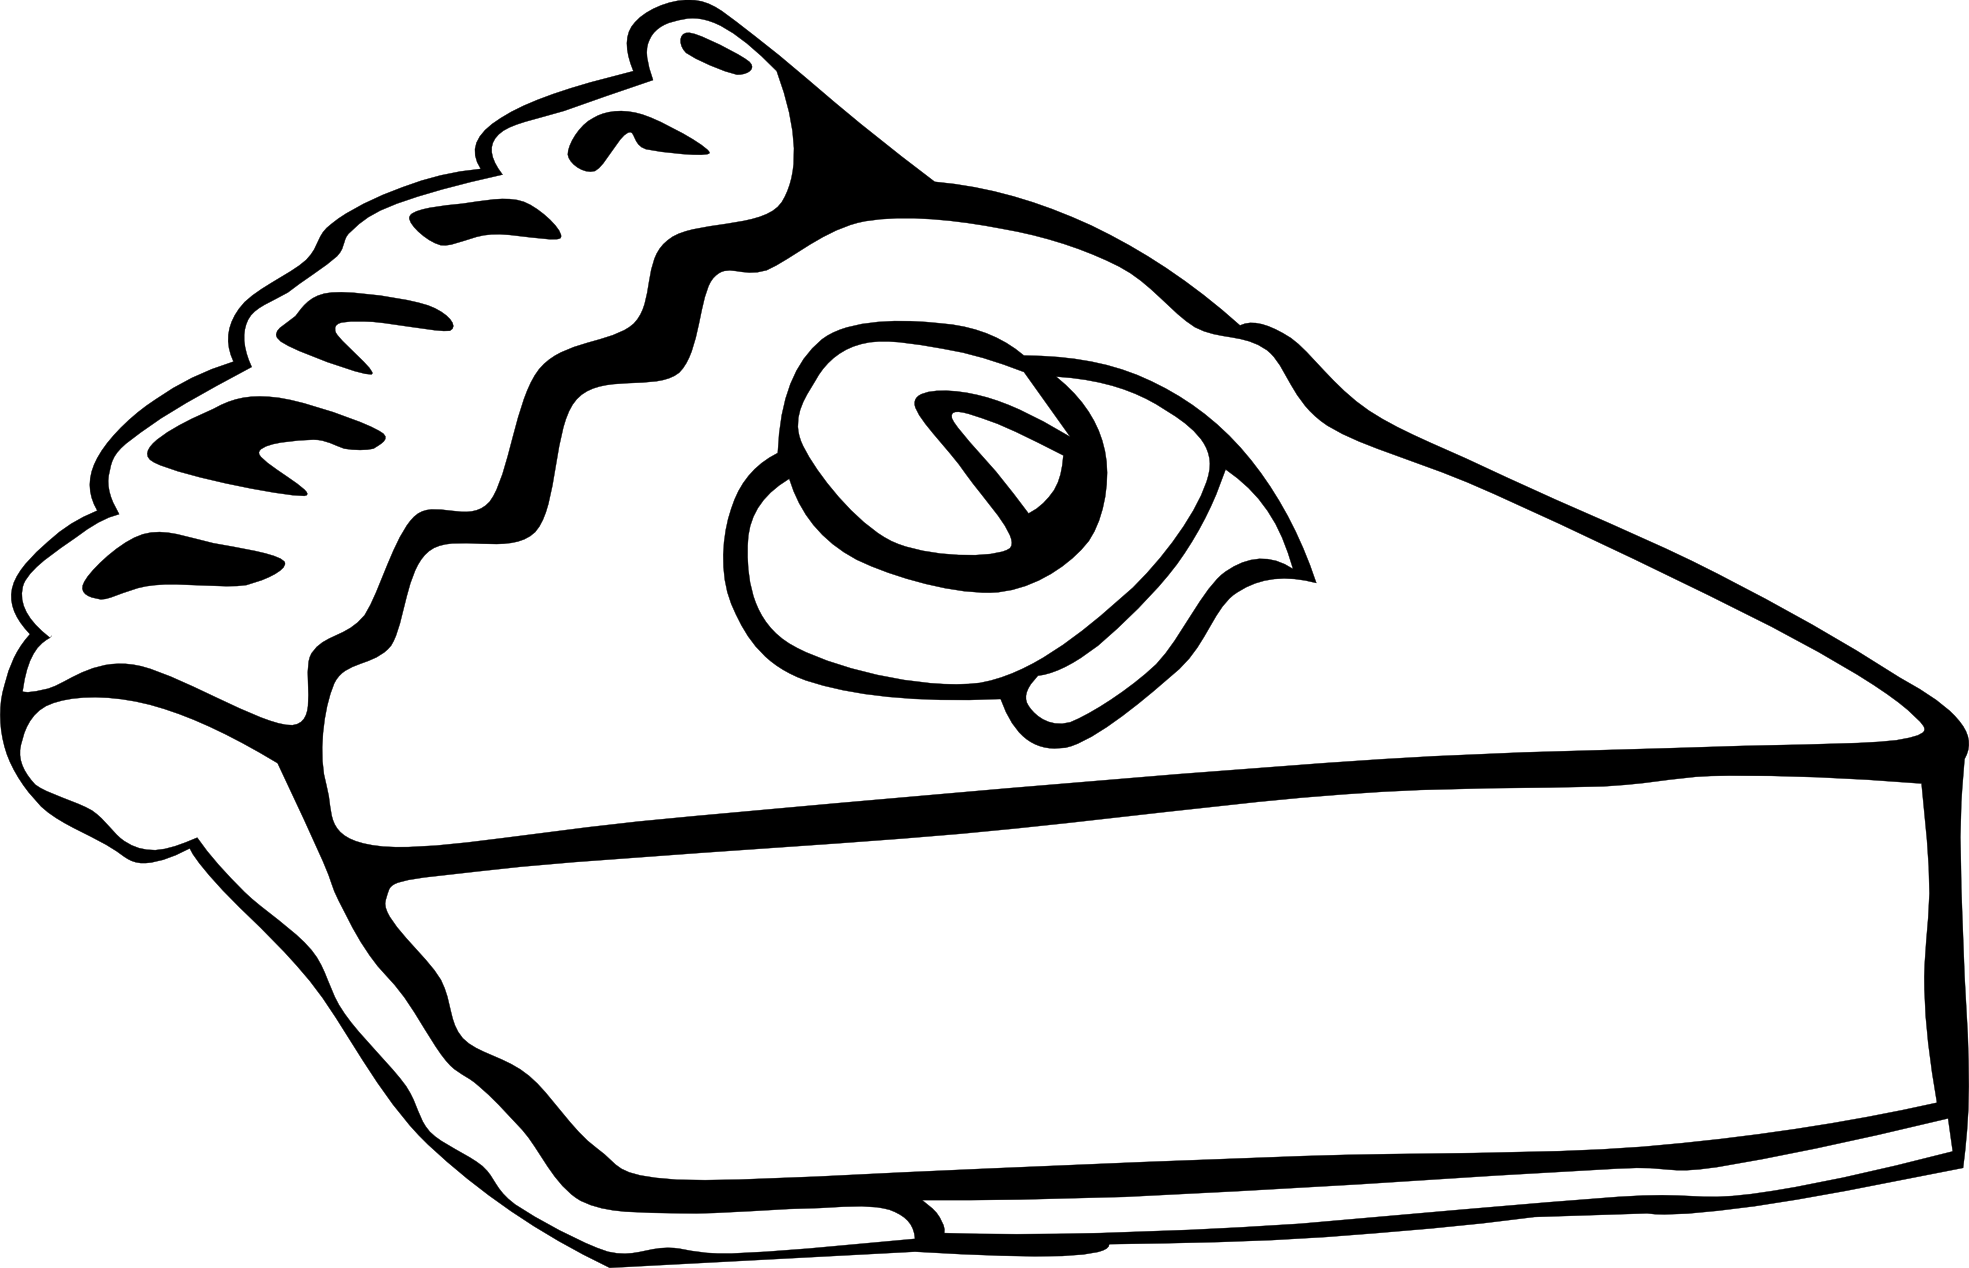 Pumpkin  black and white showing post clipart